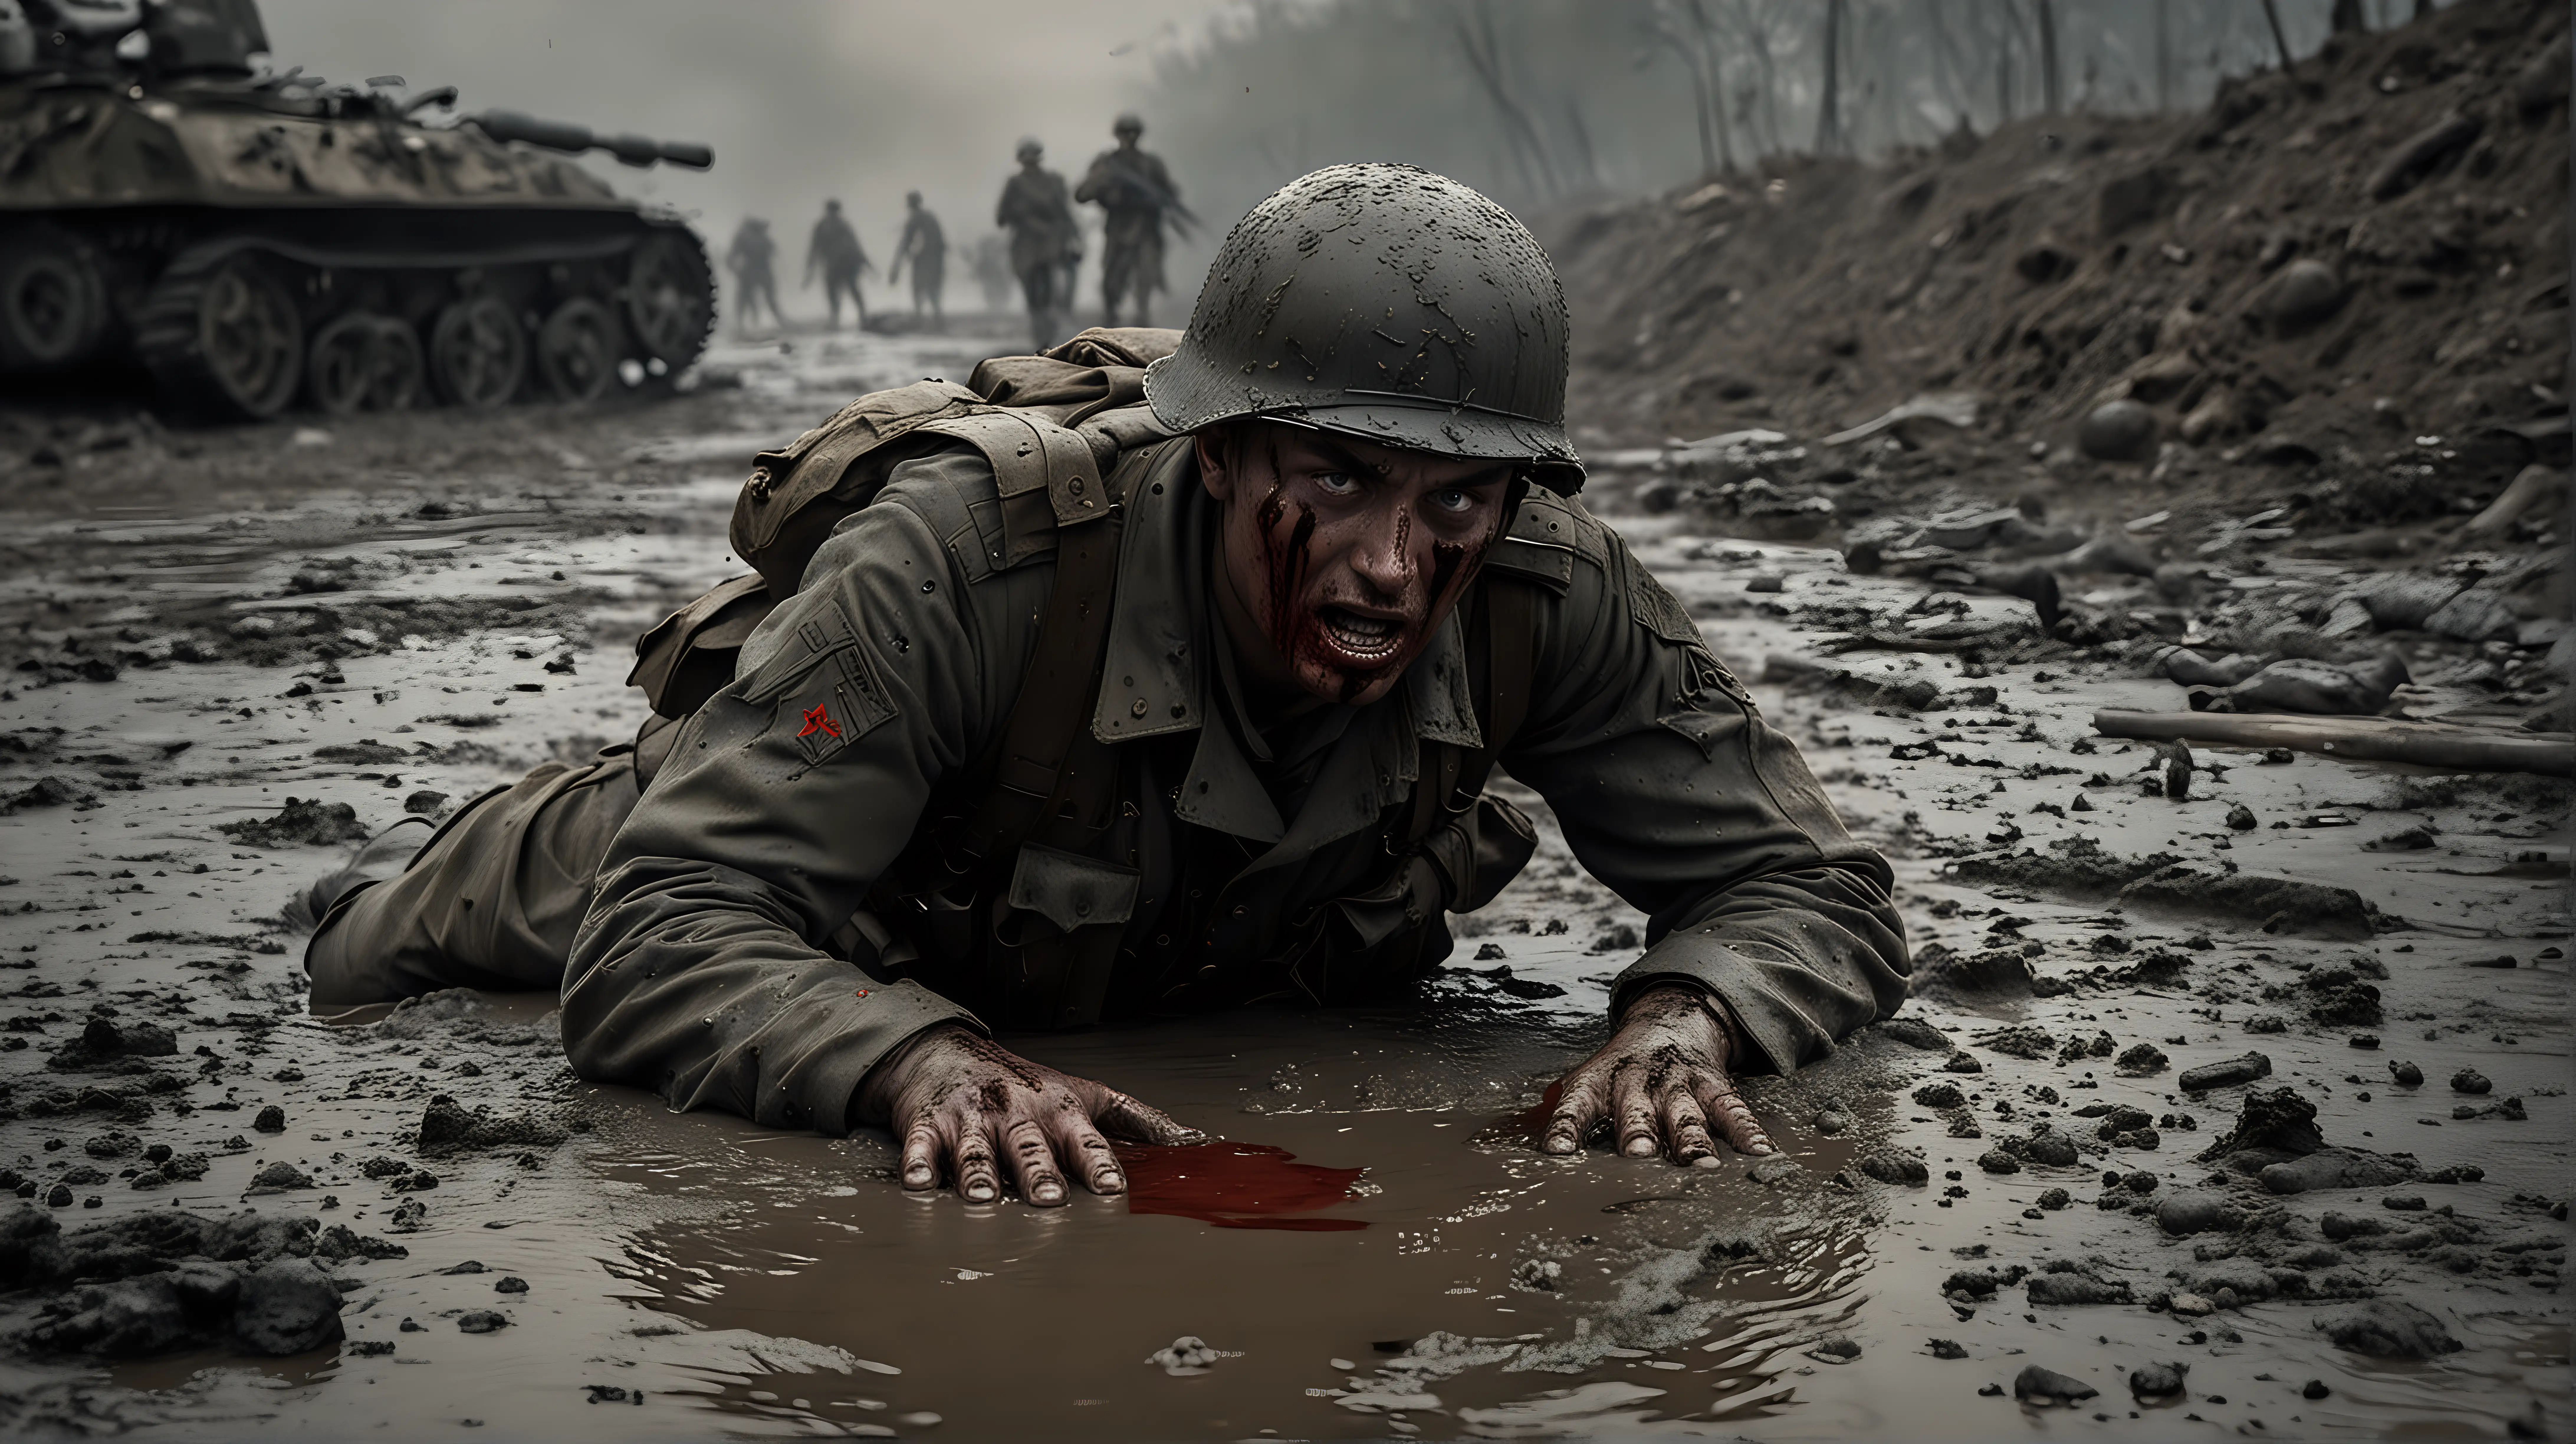 World War I Soldier Crawling in Mud Away from Tank Under Night Sky